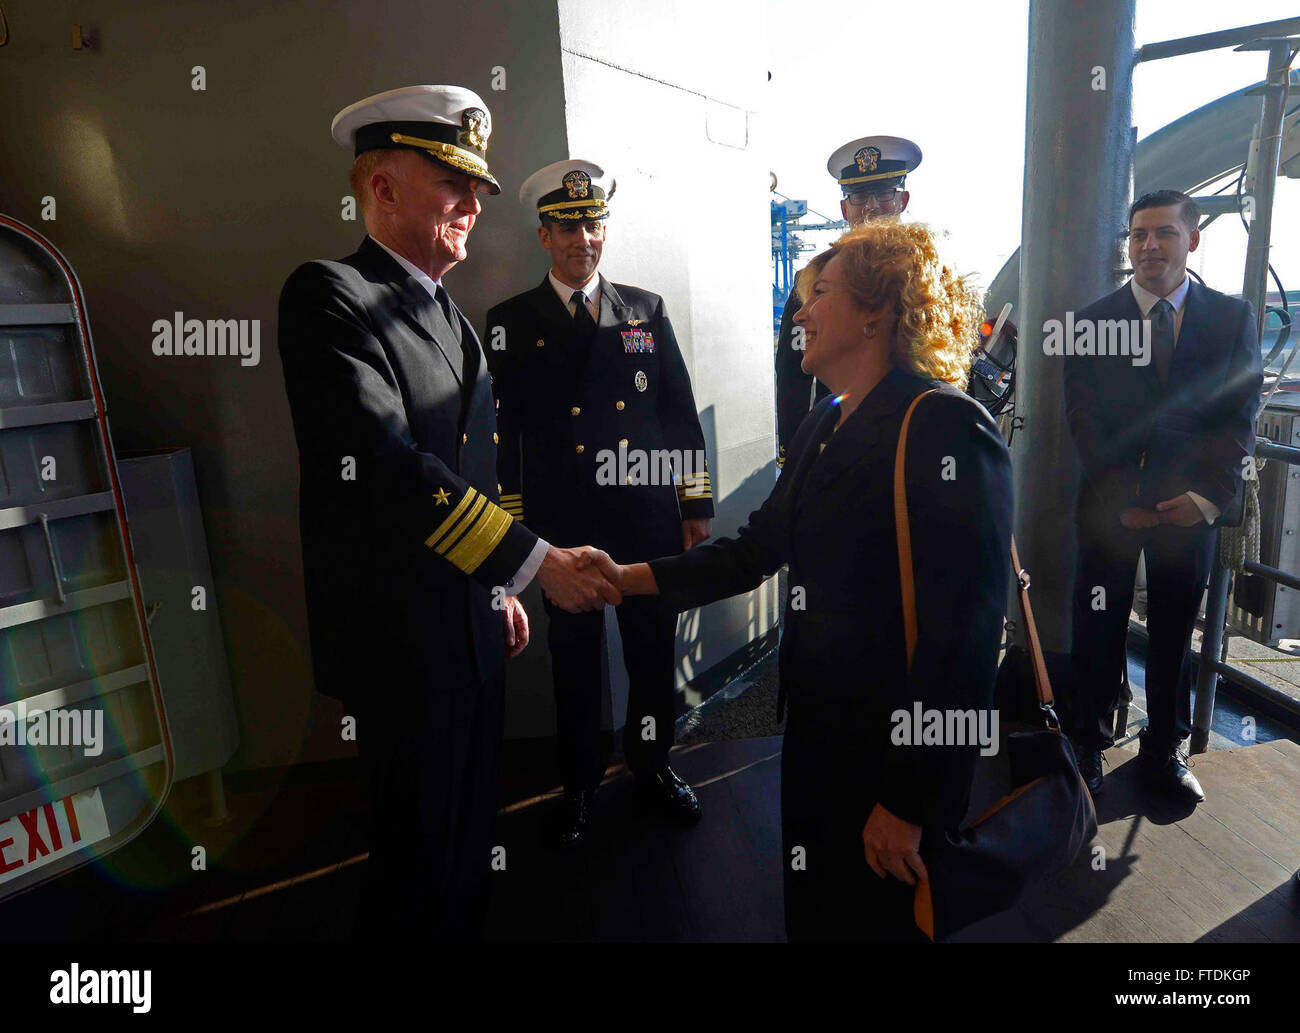 160227-N-VY489-192 LIMASSOL, Cyprus (Feb. 27, 2016) Vice Adm. James G. Foggo III, commander of U.S. 6th Fleet, greets U.S. Ambassador to Cyprus Kathleen Doherty, after she is piped aboard USS Mount Whitney (LCC 20), before a reception held on the ship. Mount Whitney, the U.S. 6th Fleet command and control ship, forward deployed to Gaeta, Italy, is conducting naval operations in the U.S. 6th Fleet area of operations in support of U.S. National security interests in Europe. (U.S. Navy Photo by Mass Communication Specialist 1st Class Mike Wright/ Released Stock Photo